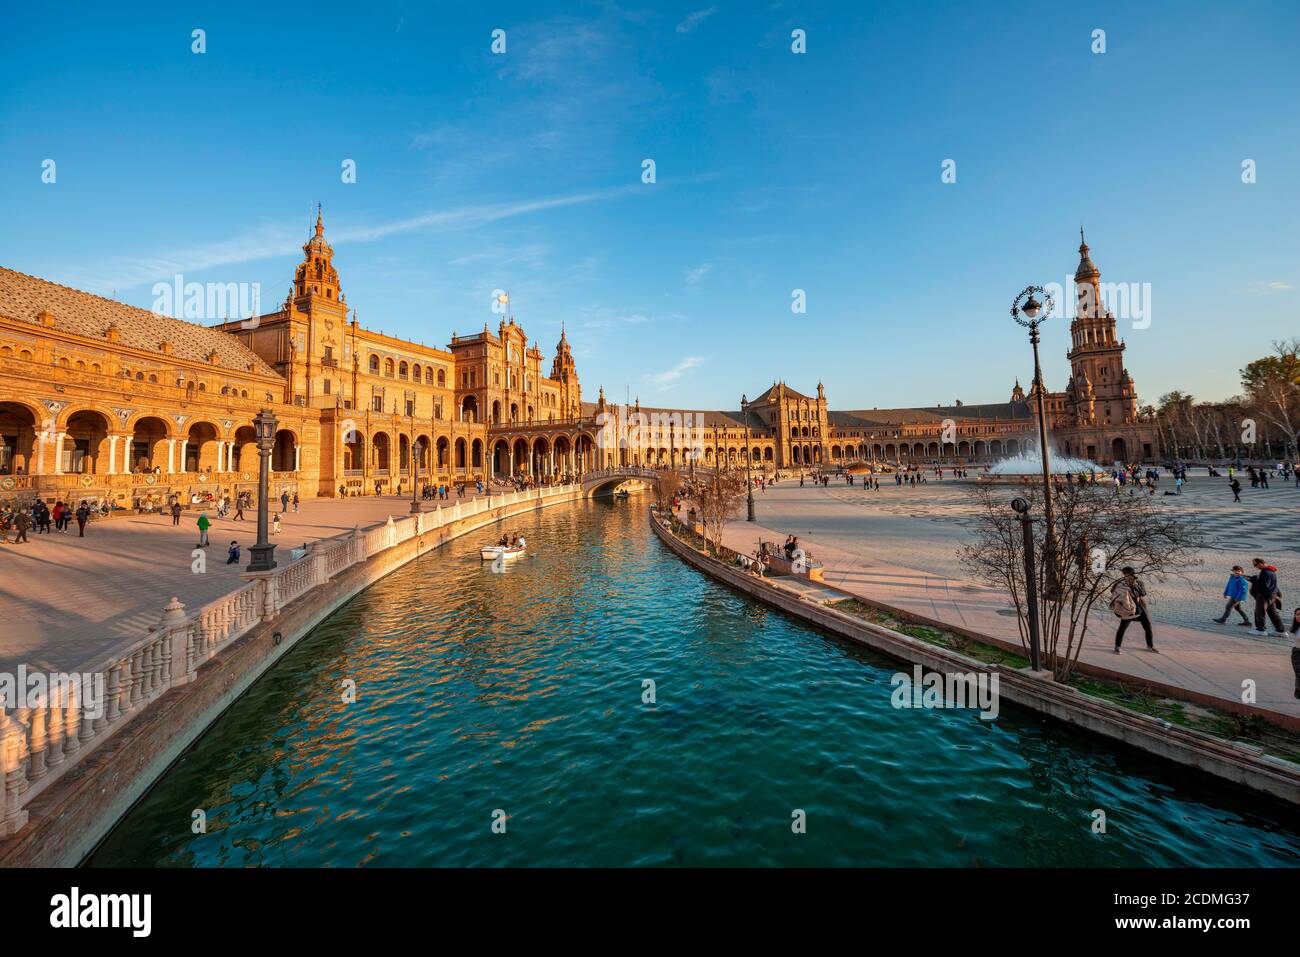 Plaza de Espana in the evening light with canal, Sevilla, Andalusia, Spain Stock Photo